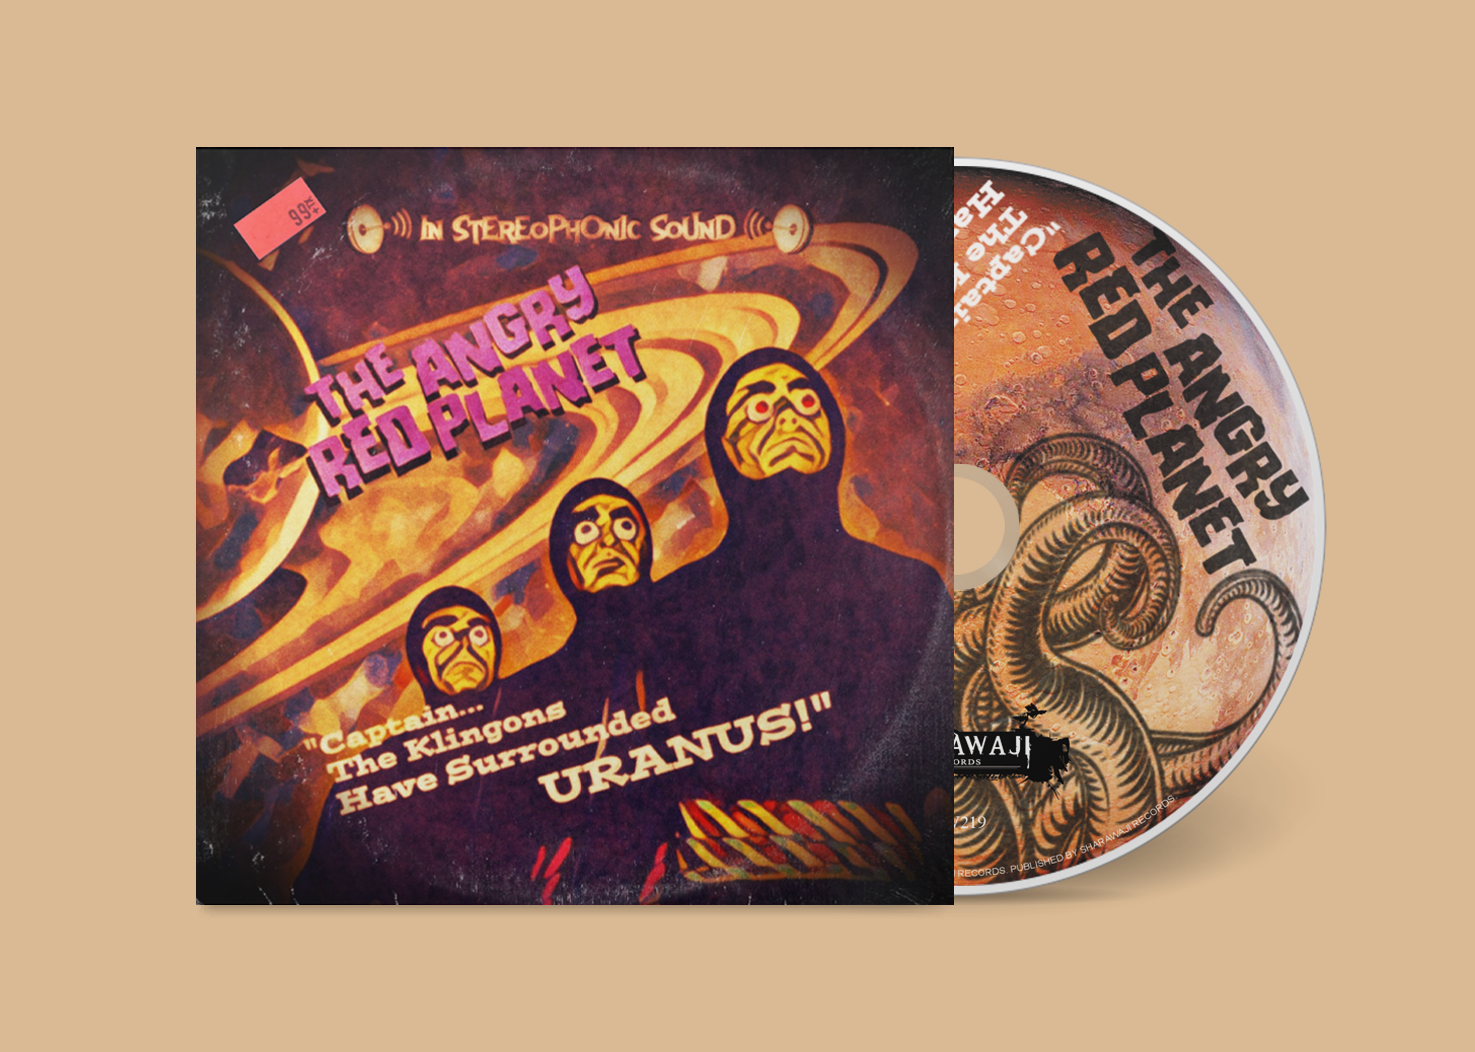 SRW219a_bandcamp_CD_template The Angry Red Planet - "Captain... The Klingons Have Surrounded Uranus!" (Jacket CD) - SHARAWAJI.COM